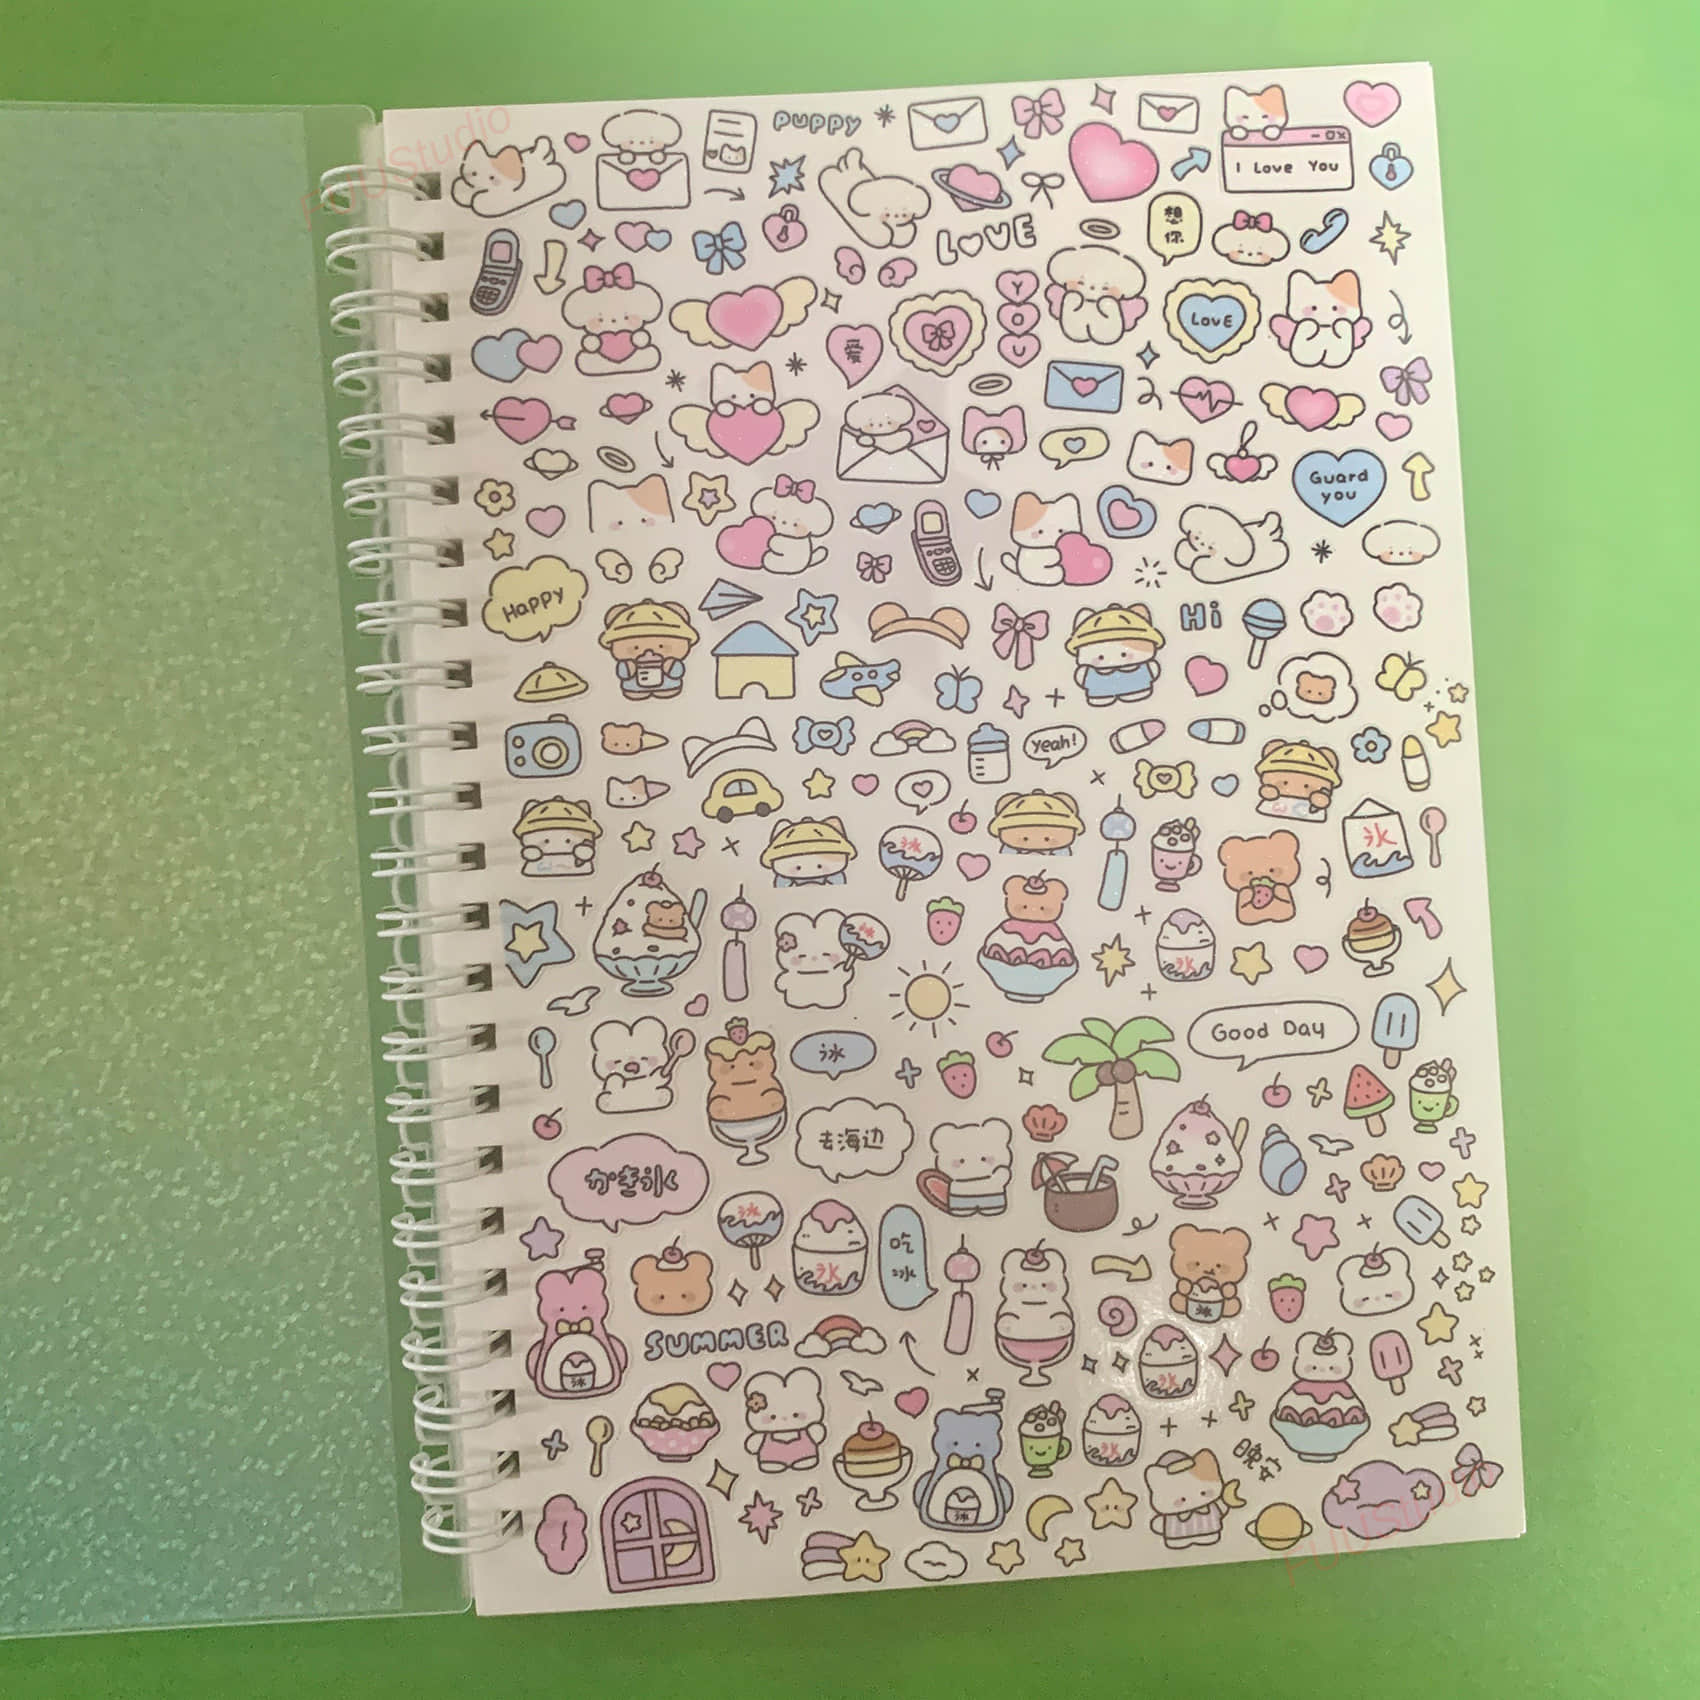 Kawaii Sticker & Glitter Holographic Cover Reusable Sticker Book A5 size, 50 double-sided pages